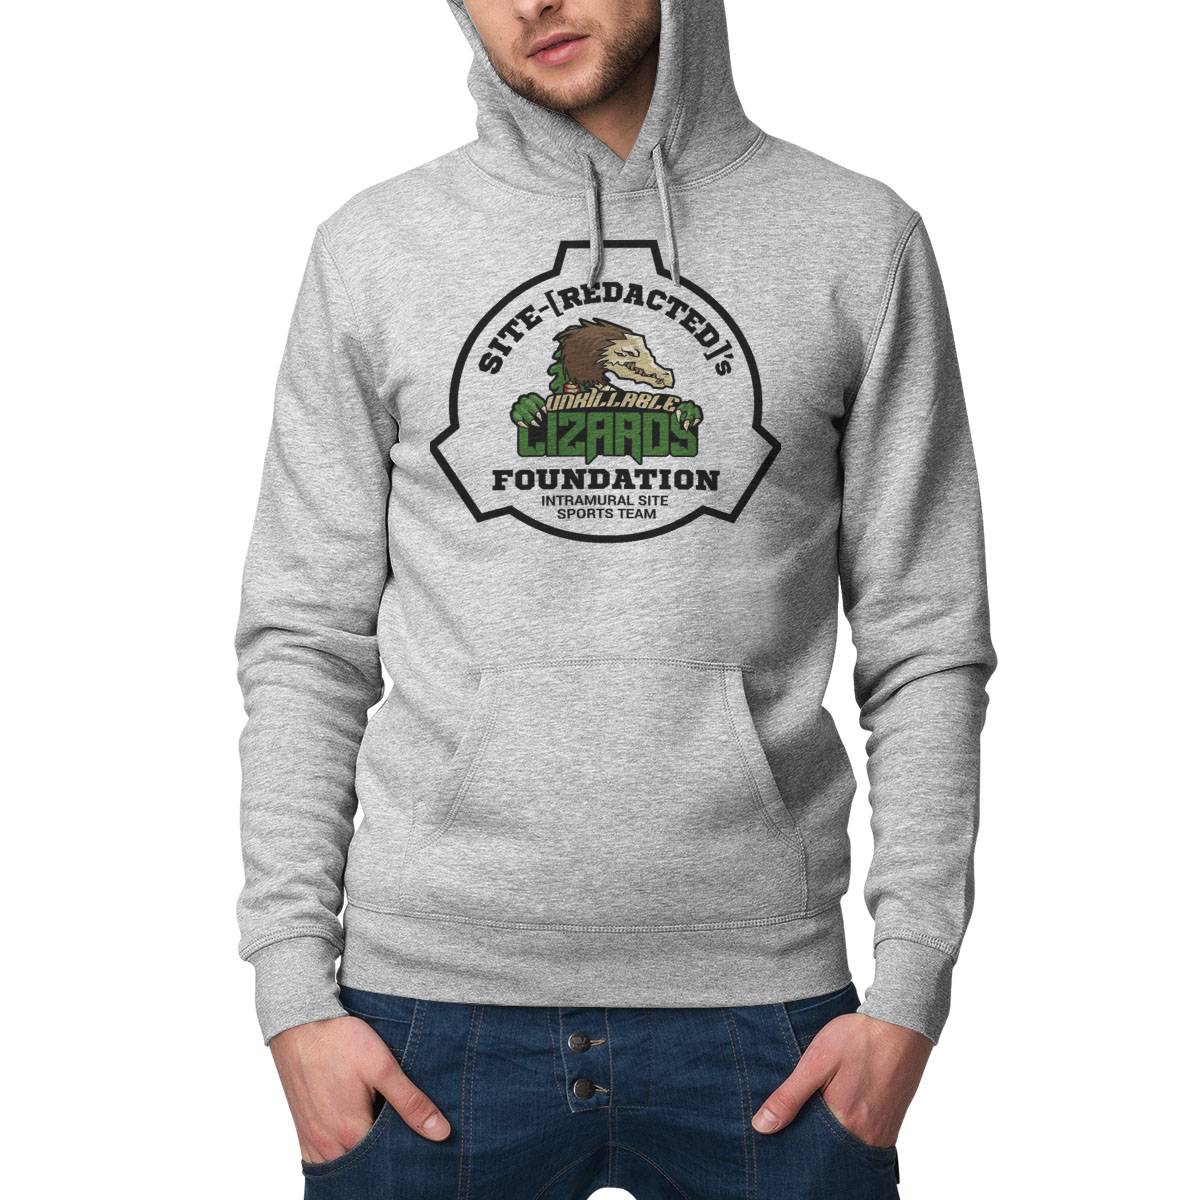 Unkillable Lizards - Scp Foundation Sports Team Hoodie - Boutique On Demand